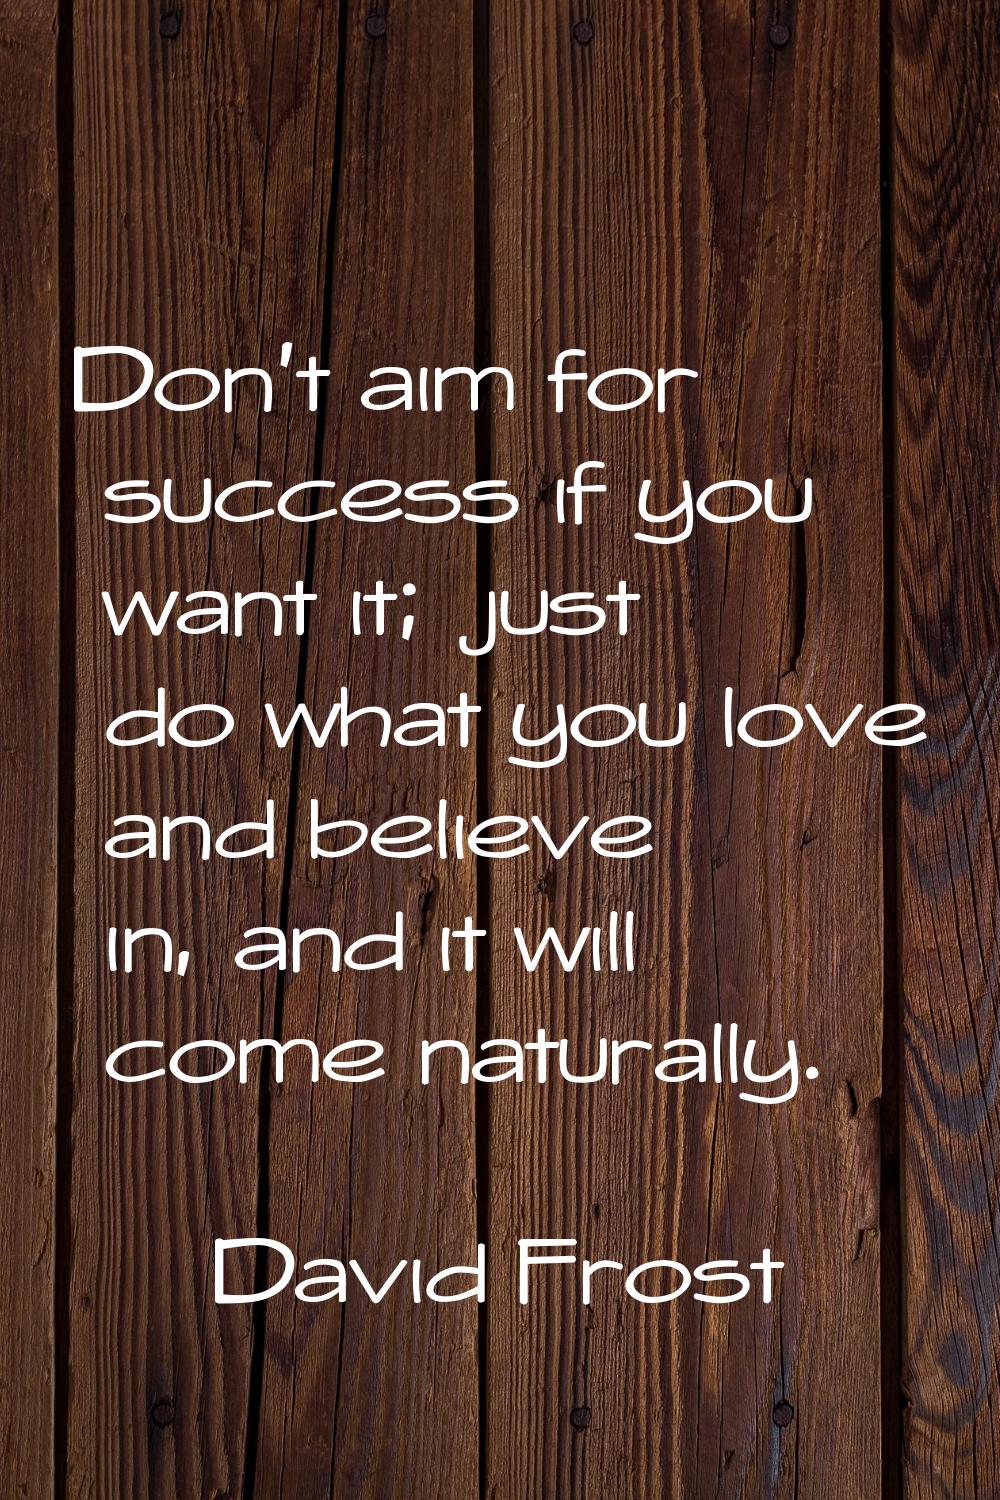 Don't aim for success if you want it; just do what you love and believe in, and it will come natura